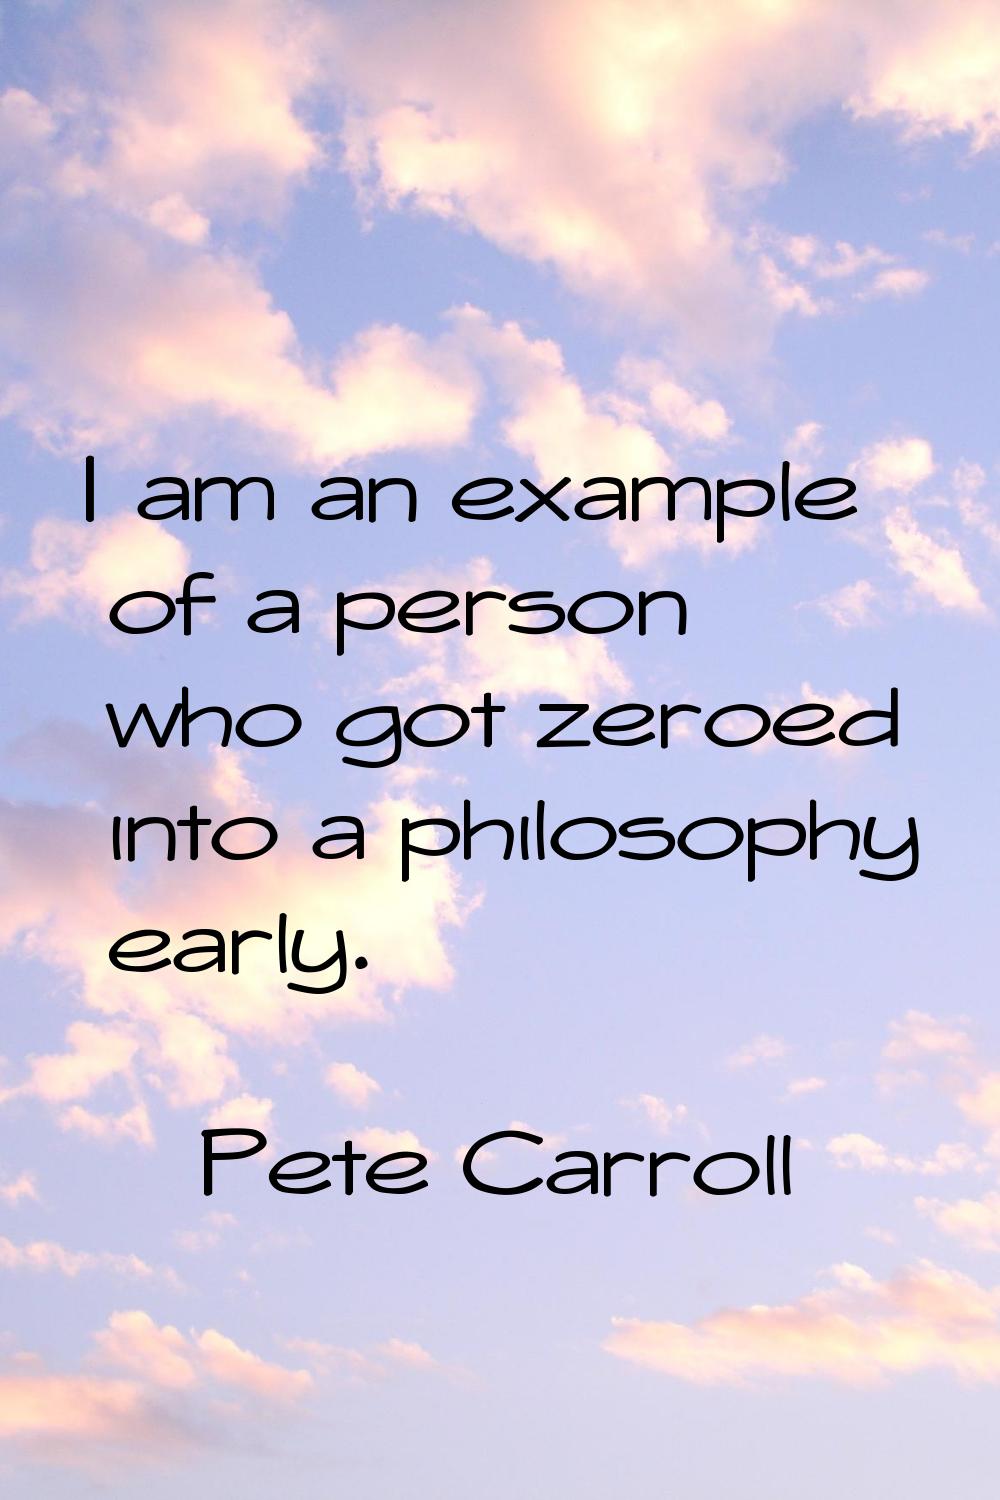 I am an example of a person who got zeroed into a philosophy early.